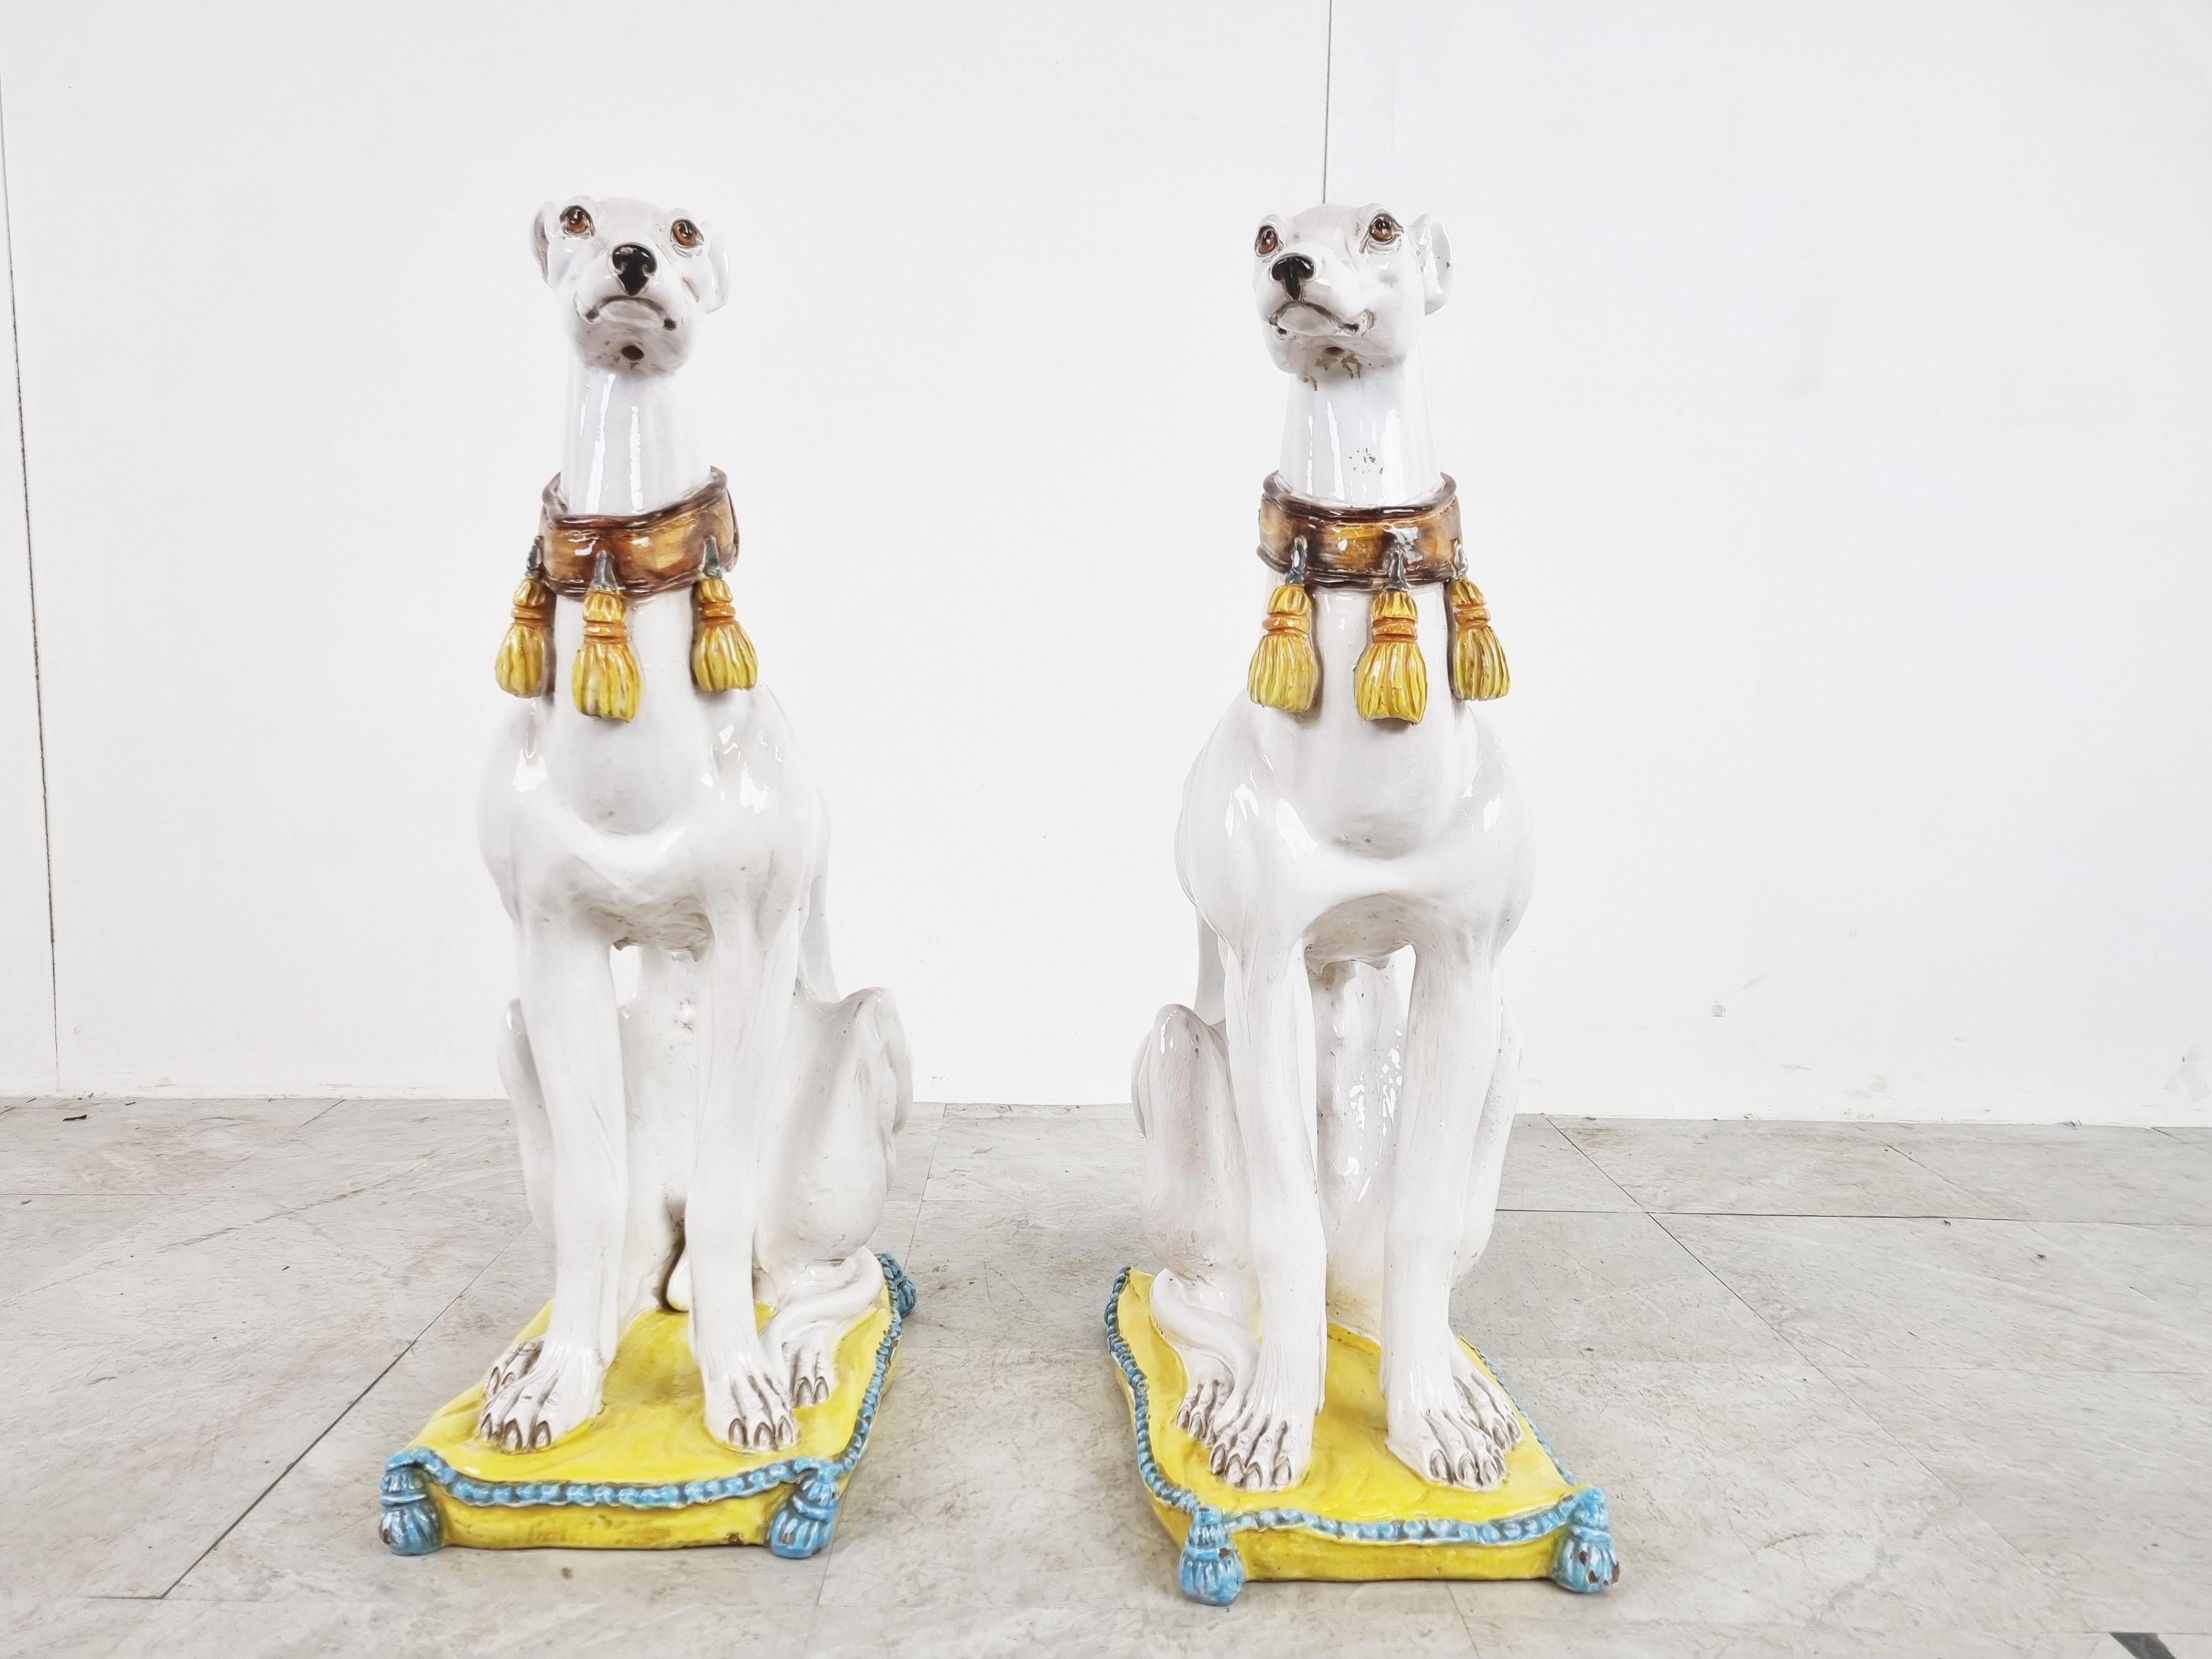 Pair of mid century glazed terracotta Grehyhound dog sculptures depicted sitting cushions.

Beautifully made with eye for details.

These life sized sculptures are very decorative, especially as a pair to decorate a entryway or living